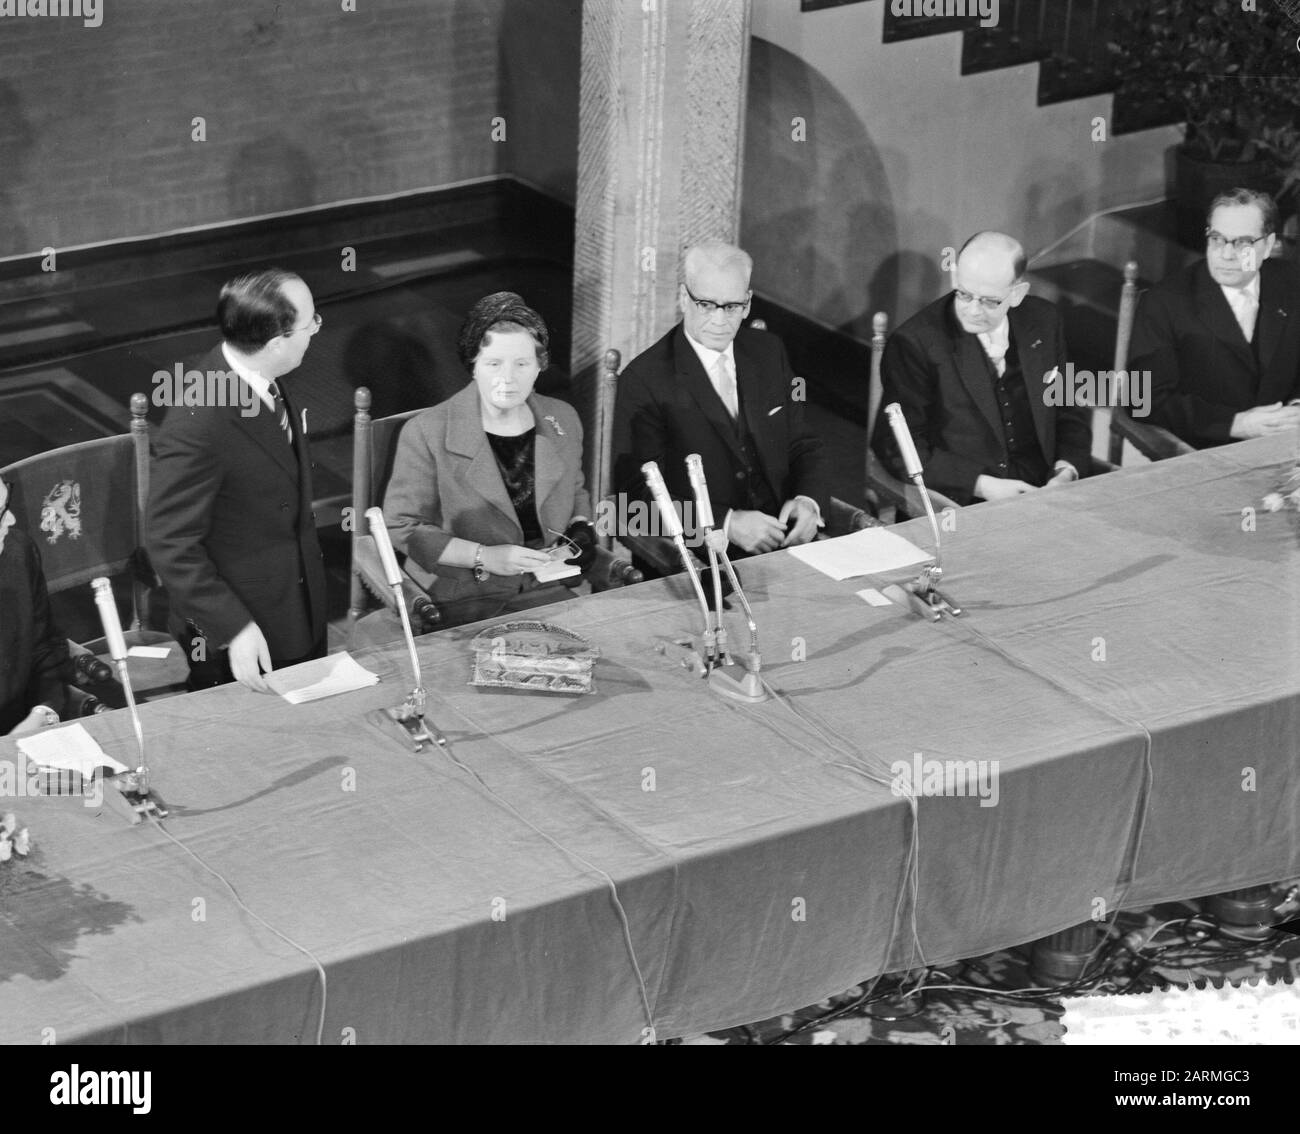 Installation by Her Majesty of the Cultural Council for the Kingdom, from l.n.r. Minister mr. J.C. Debrot, Minister J. Cals, Queen Juliana Date: February 2, 1961 Keywords: Advisory Council, queens Personal name: Cals, Jo, Debrot, J.C., Juliana, Queen Stock Photo